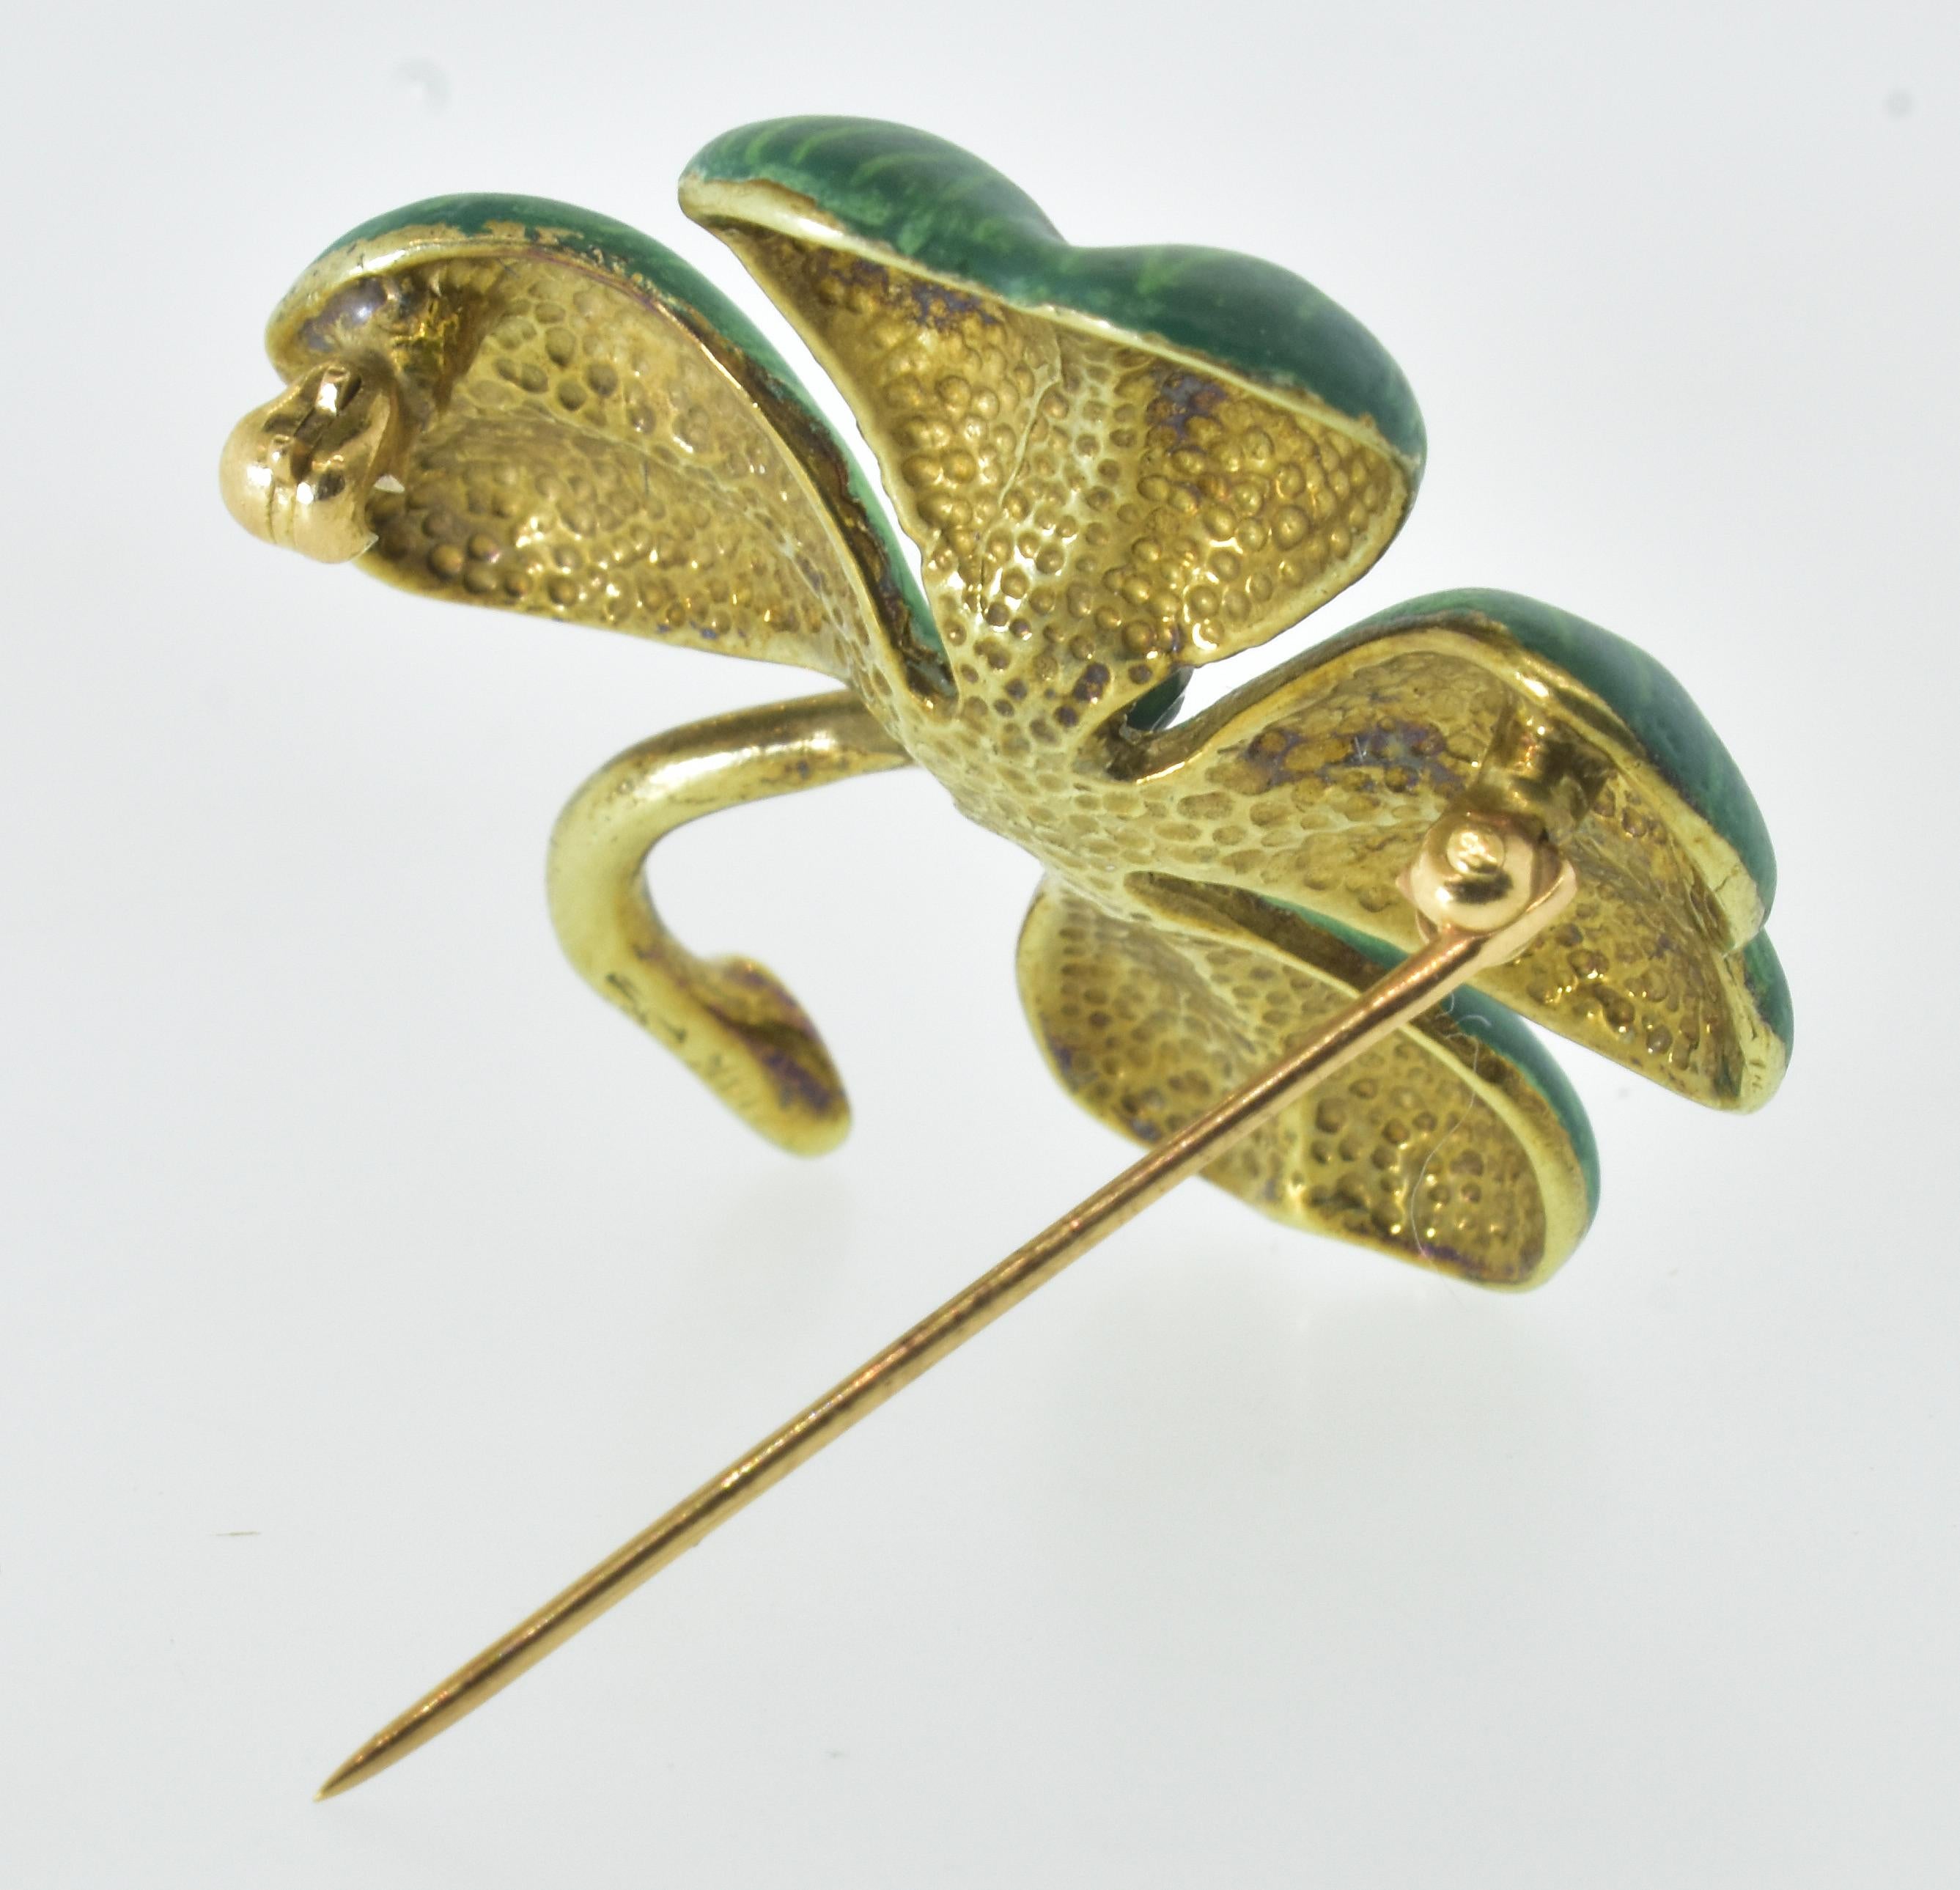 Antique enamel pin with a four leaf clover motif, the leaves are heart shaped.  The pin is 1.25 inches in diameter.  The shaded green enamel is in perfect condition.   The white diamond prong set in the center weighs .10 ct.   The piece is finely